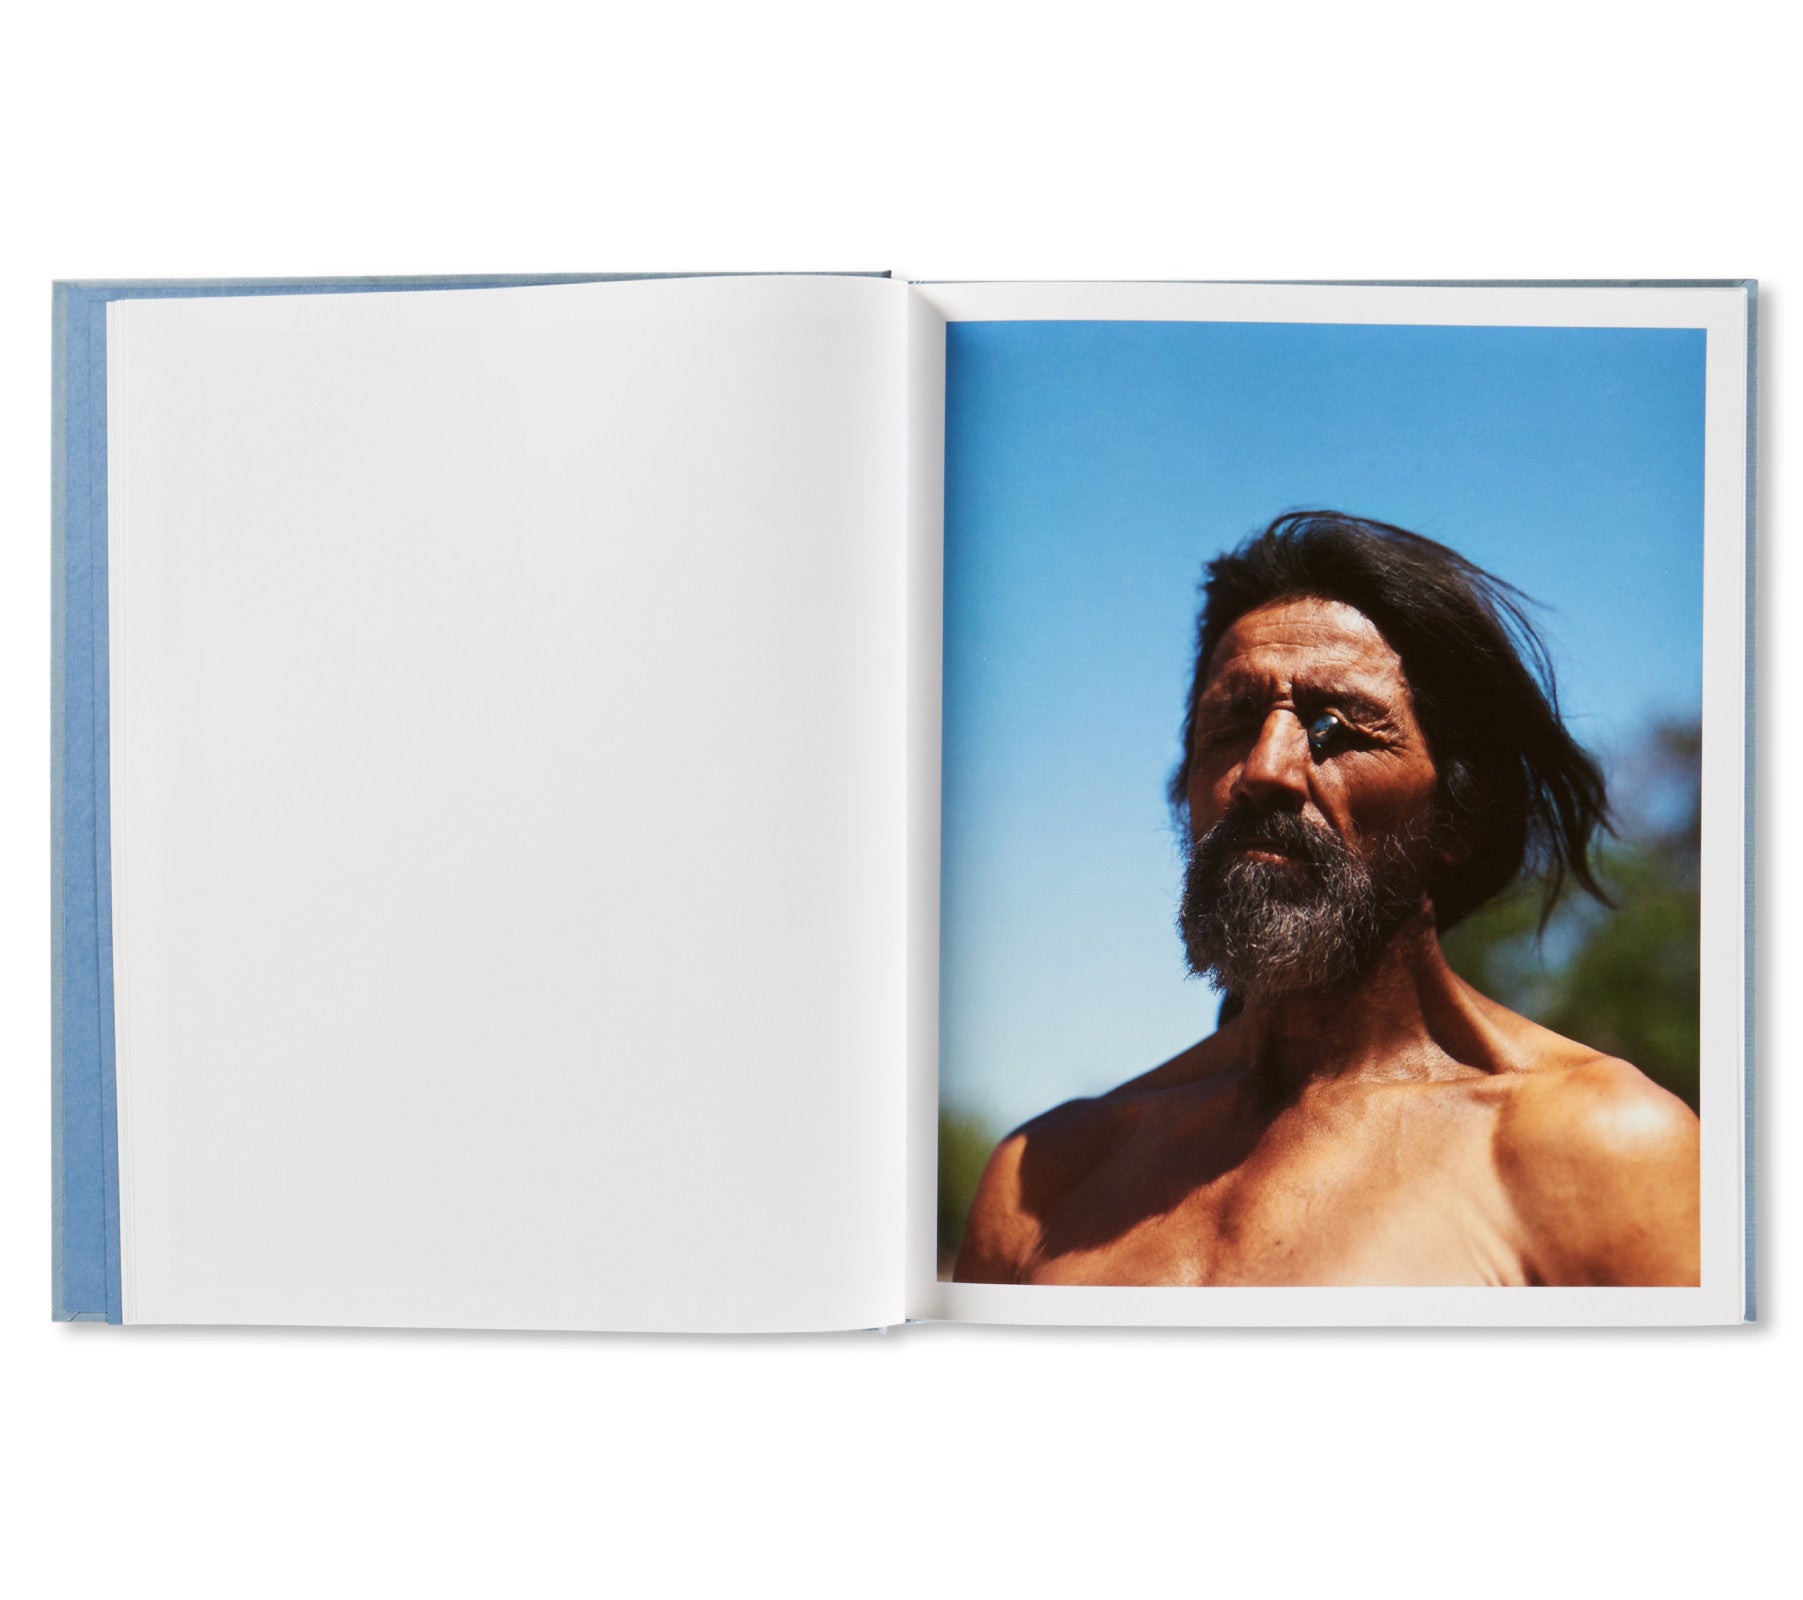 ZZYZX by Gregory Halpern [FIRST EDITION, FIRST PRINTING]